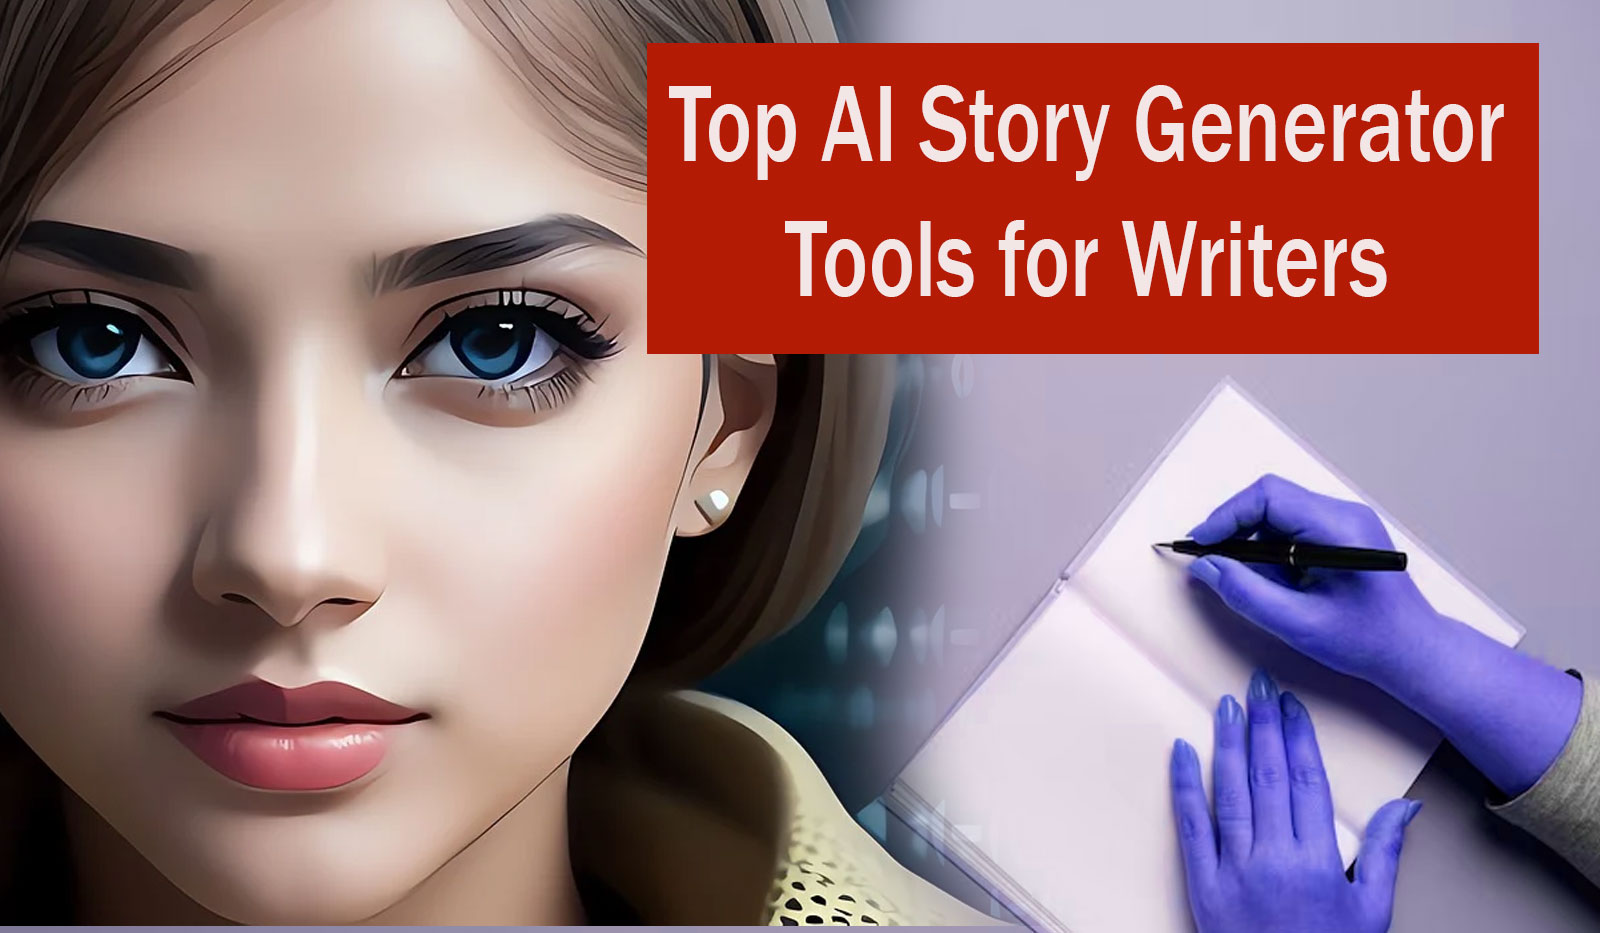 Top AI Story Generator Tools for Writers